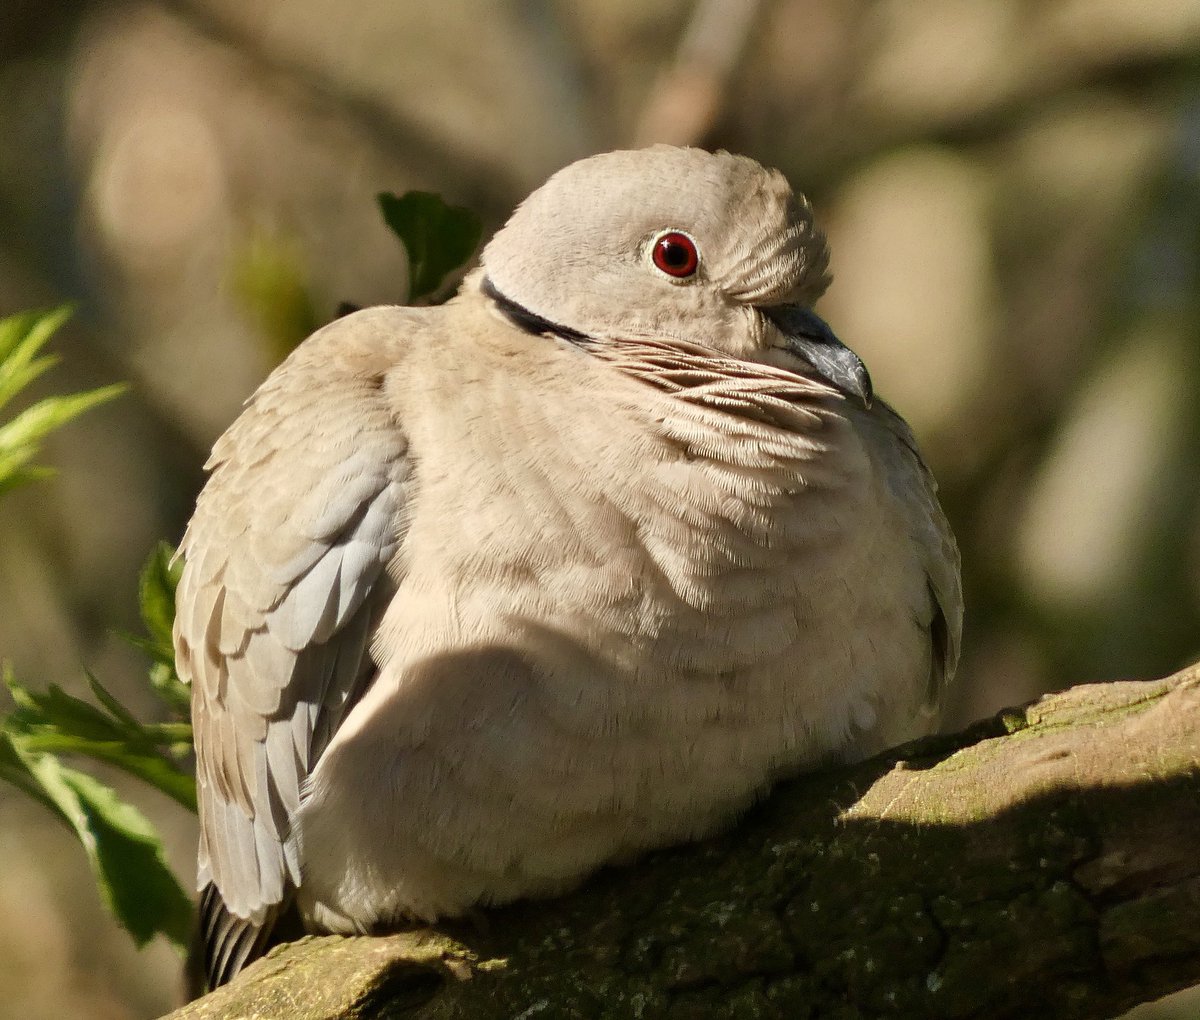 Love collared doves, we have a pair visit the garden regularly.  #springwatch